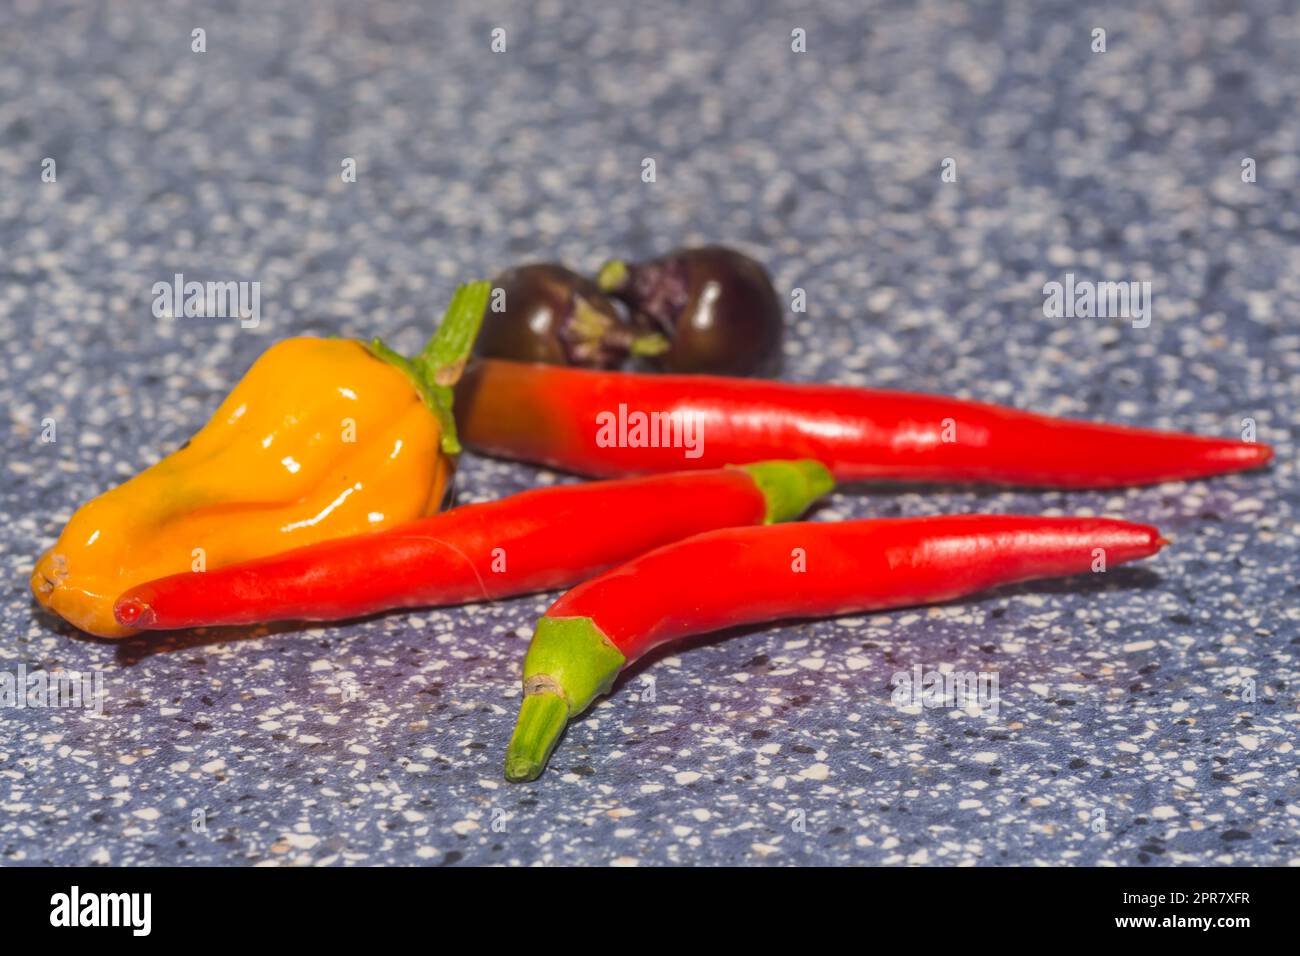 colorful sharp chilis from the garden Stock Photo